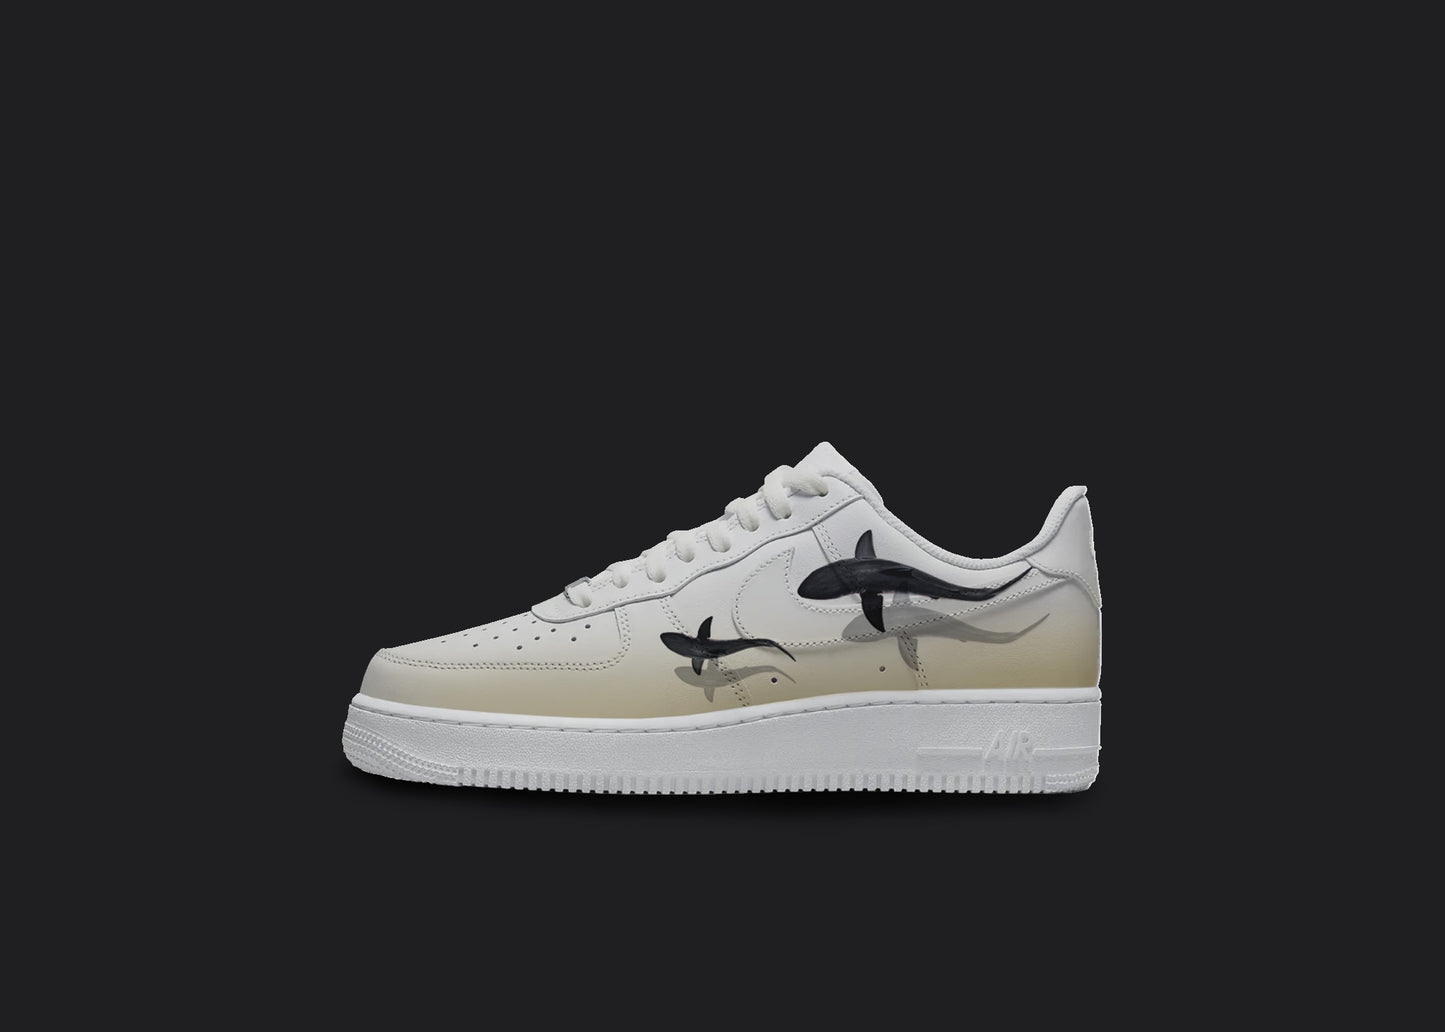 The image is of a Custom Nike Air force 1 sneaker on a blank black background. The white custom nike sneaker has a yellow fade and 2 sharks swimming on the side.  